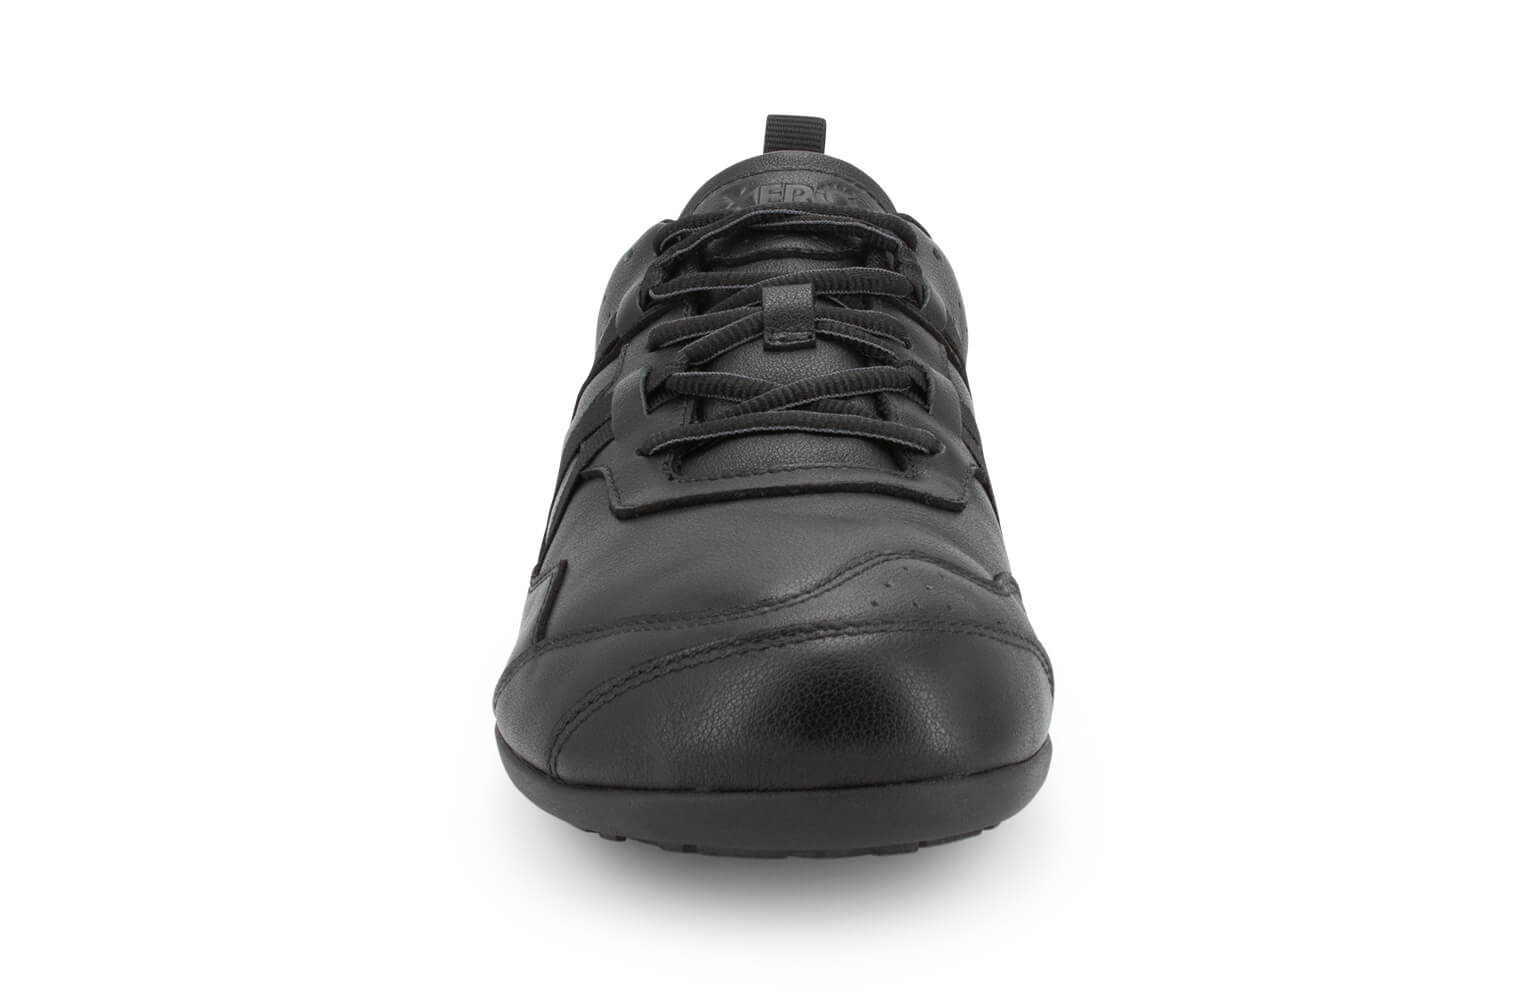 Xero Shoes Prio Mens Size 14 Black Minimalist Barefoot Shoes Lace Up  Sneakers